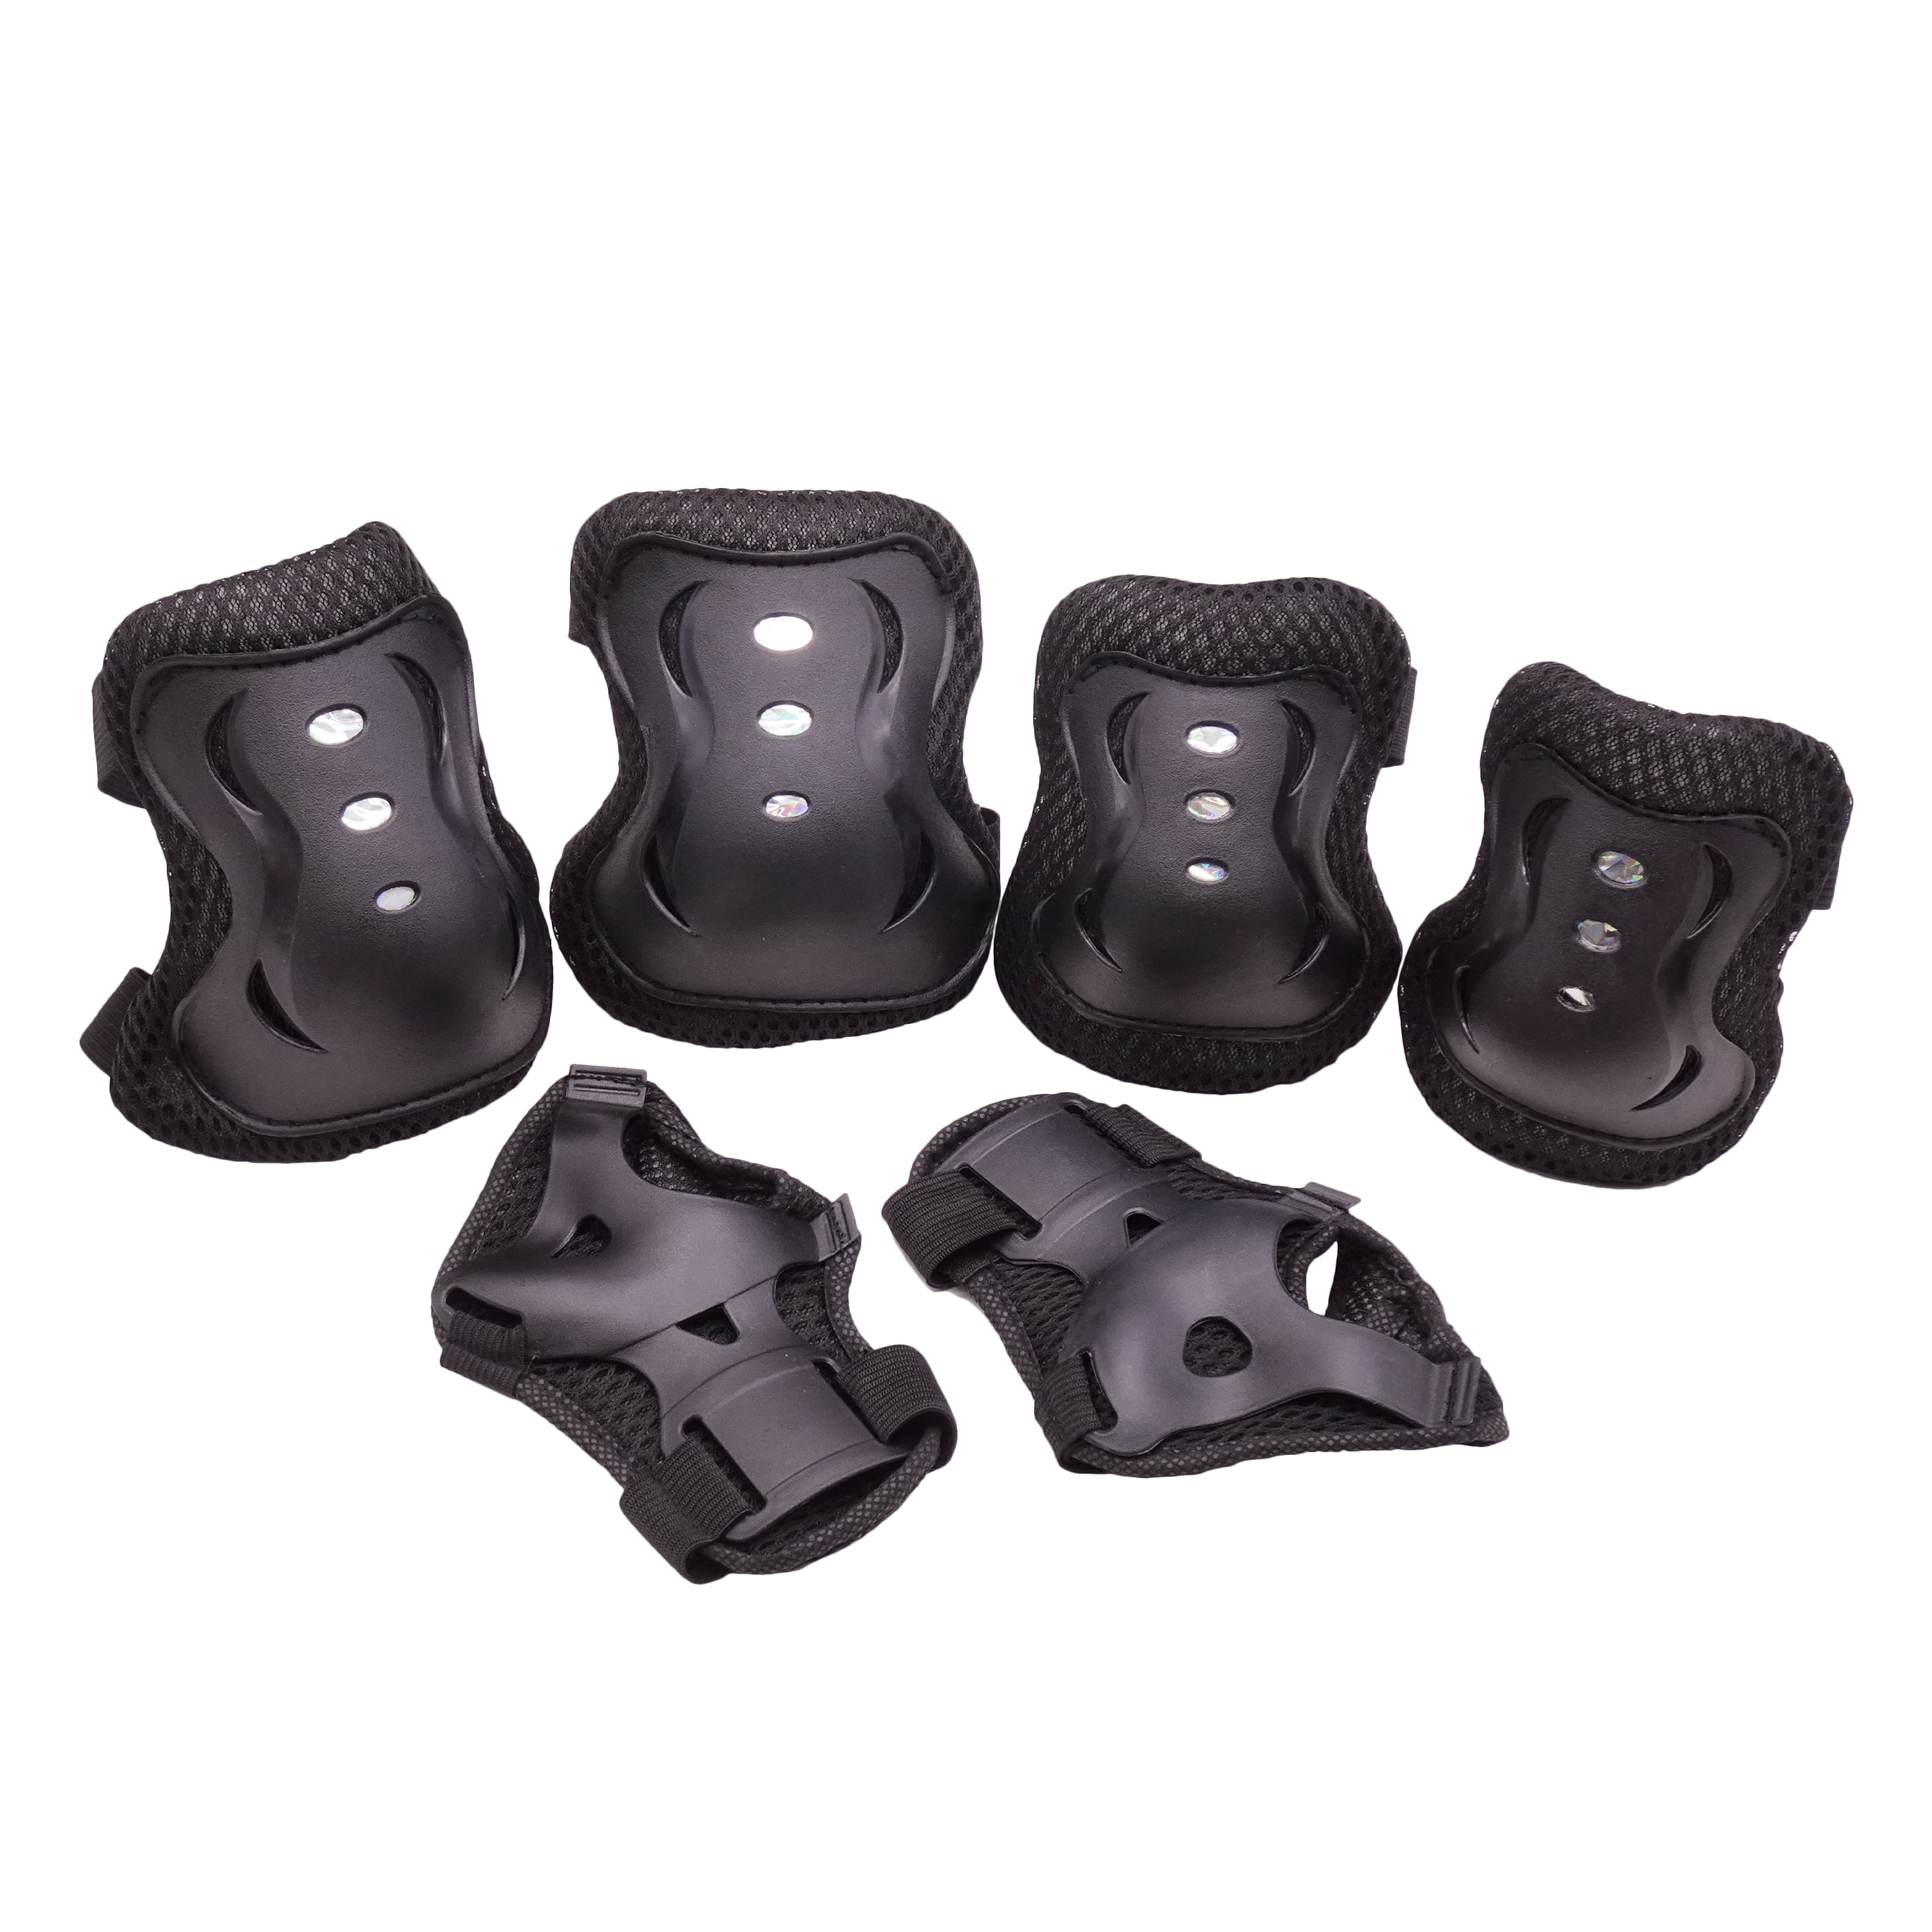 Black Child's Small   Same Day Post Other Sizes Available Knee Pads 